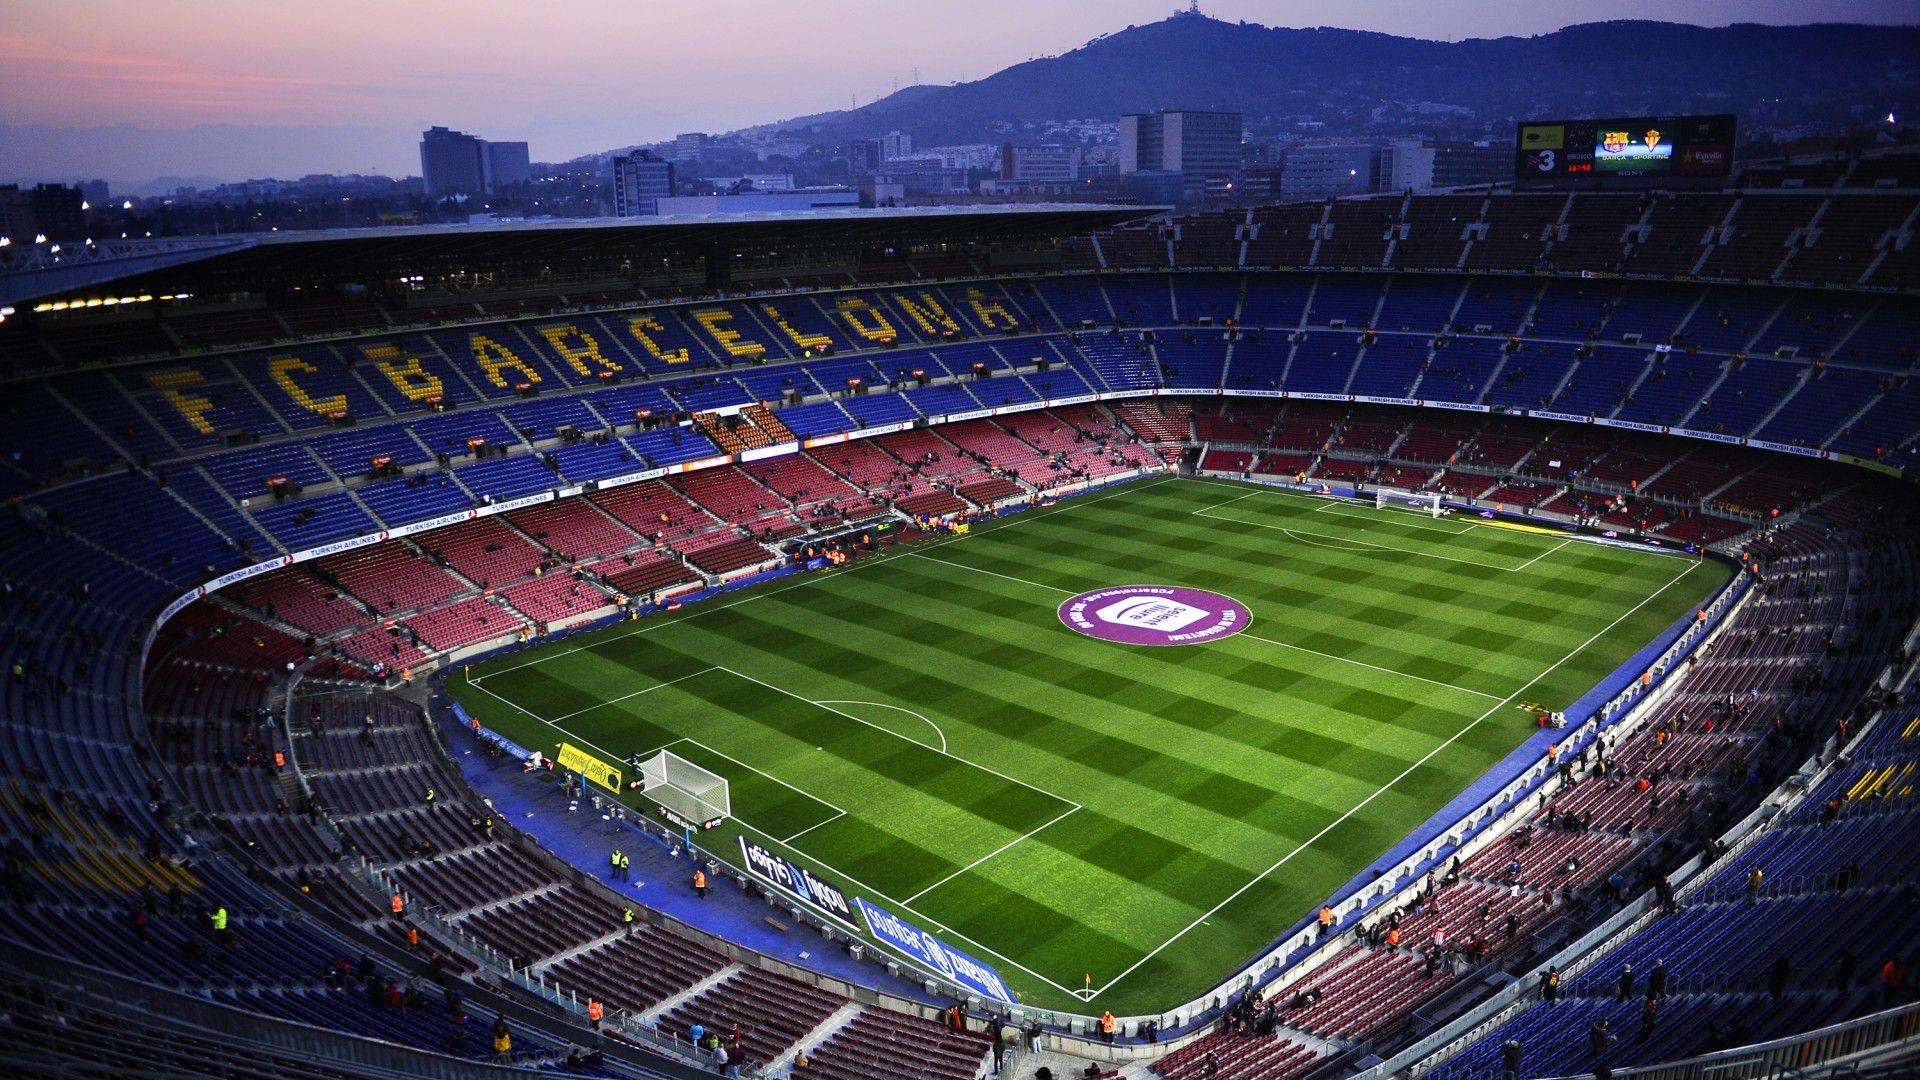 A tour of the Camp Nou stadium, with a personalised football kit